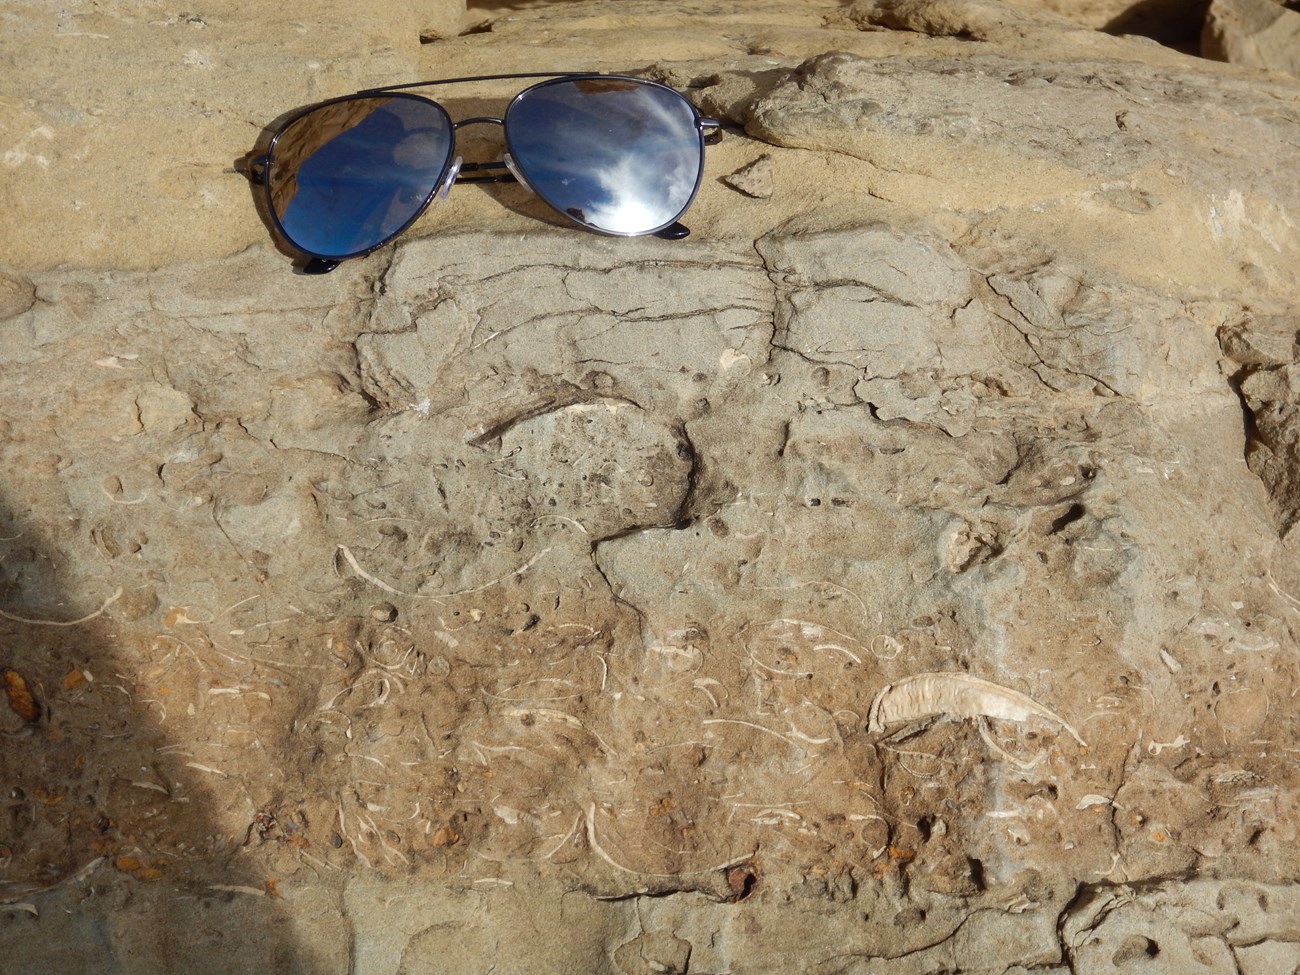 Fossilized shells in the cliffs at Chaco Canyon.